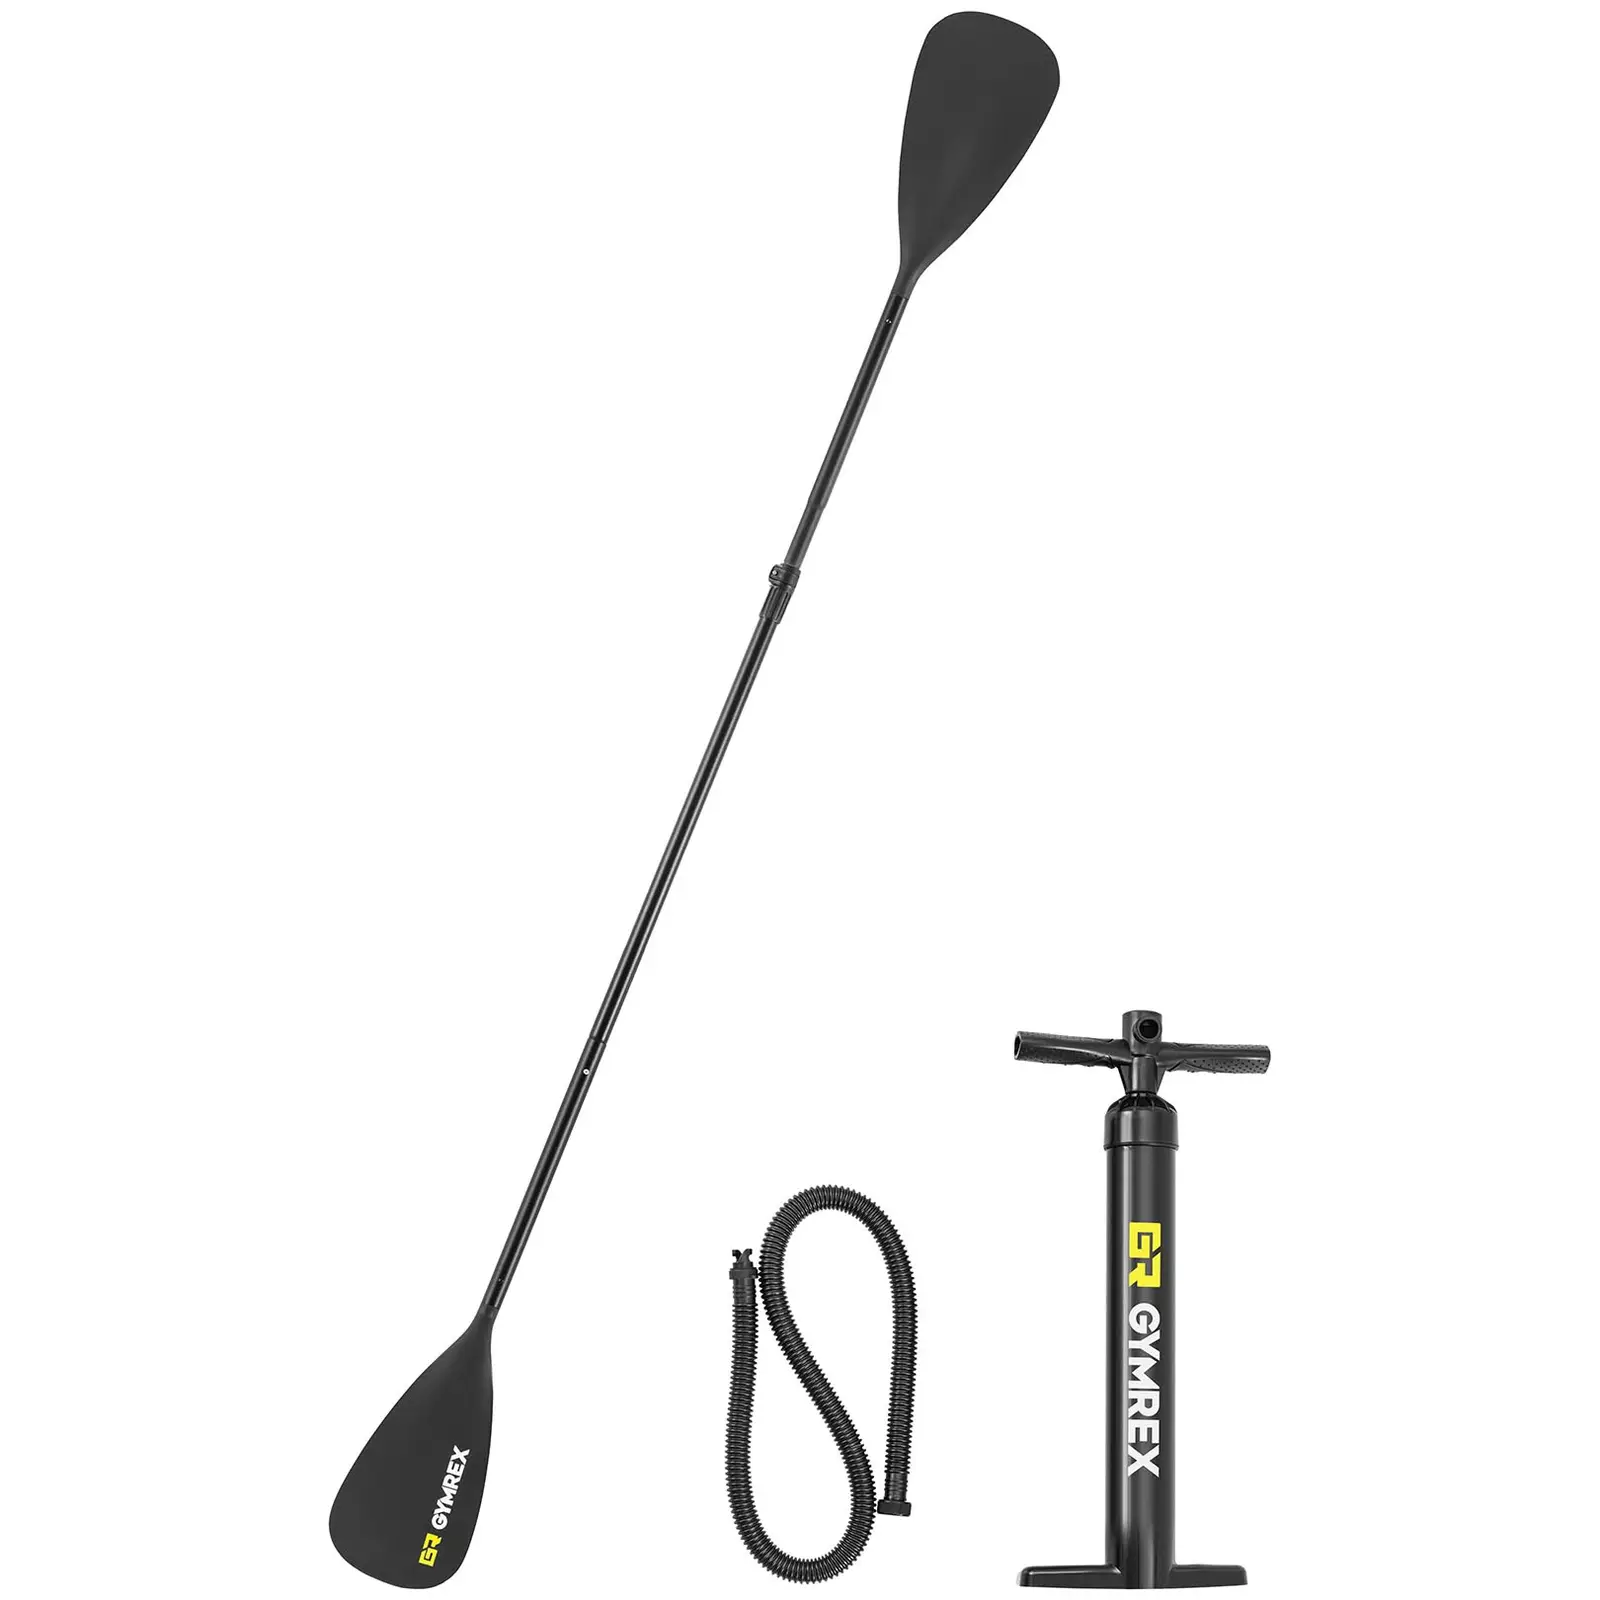 Stand up paddle gonflable - 105 kg - noir - double chambre - 302 x 81 x 38 cm